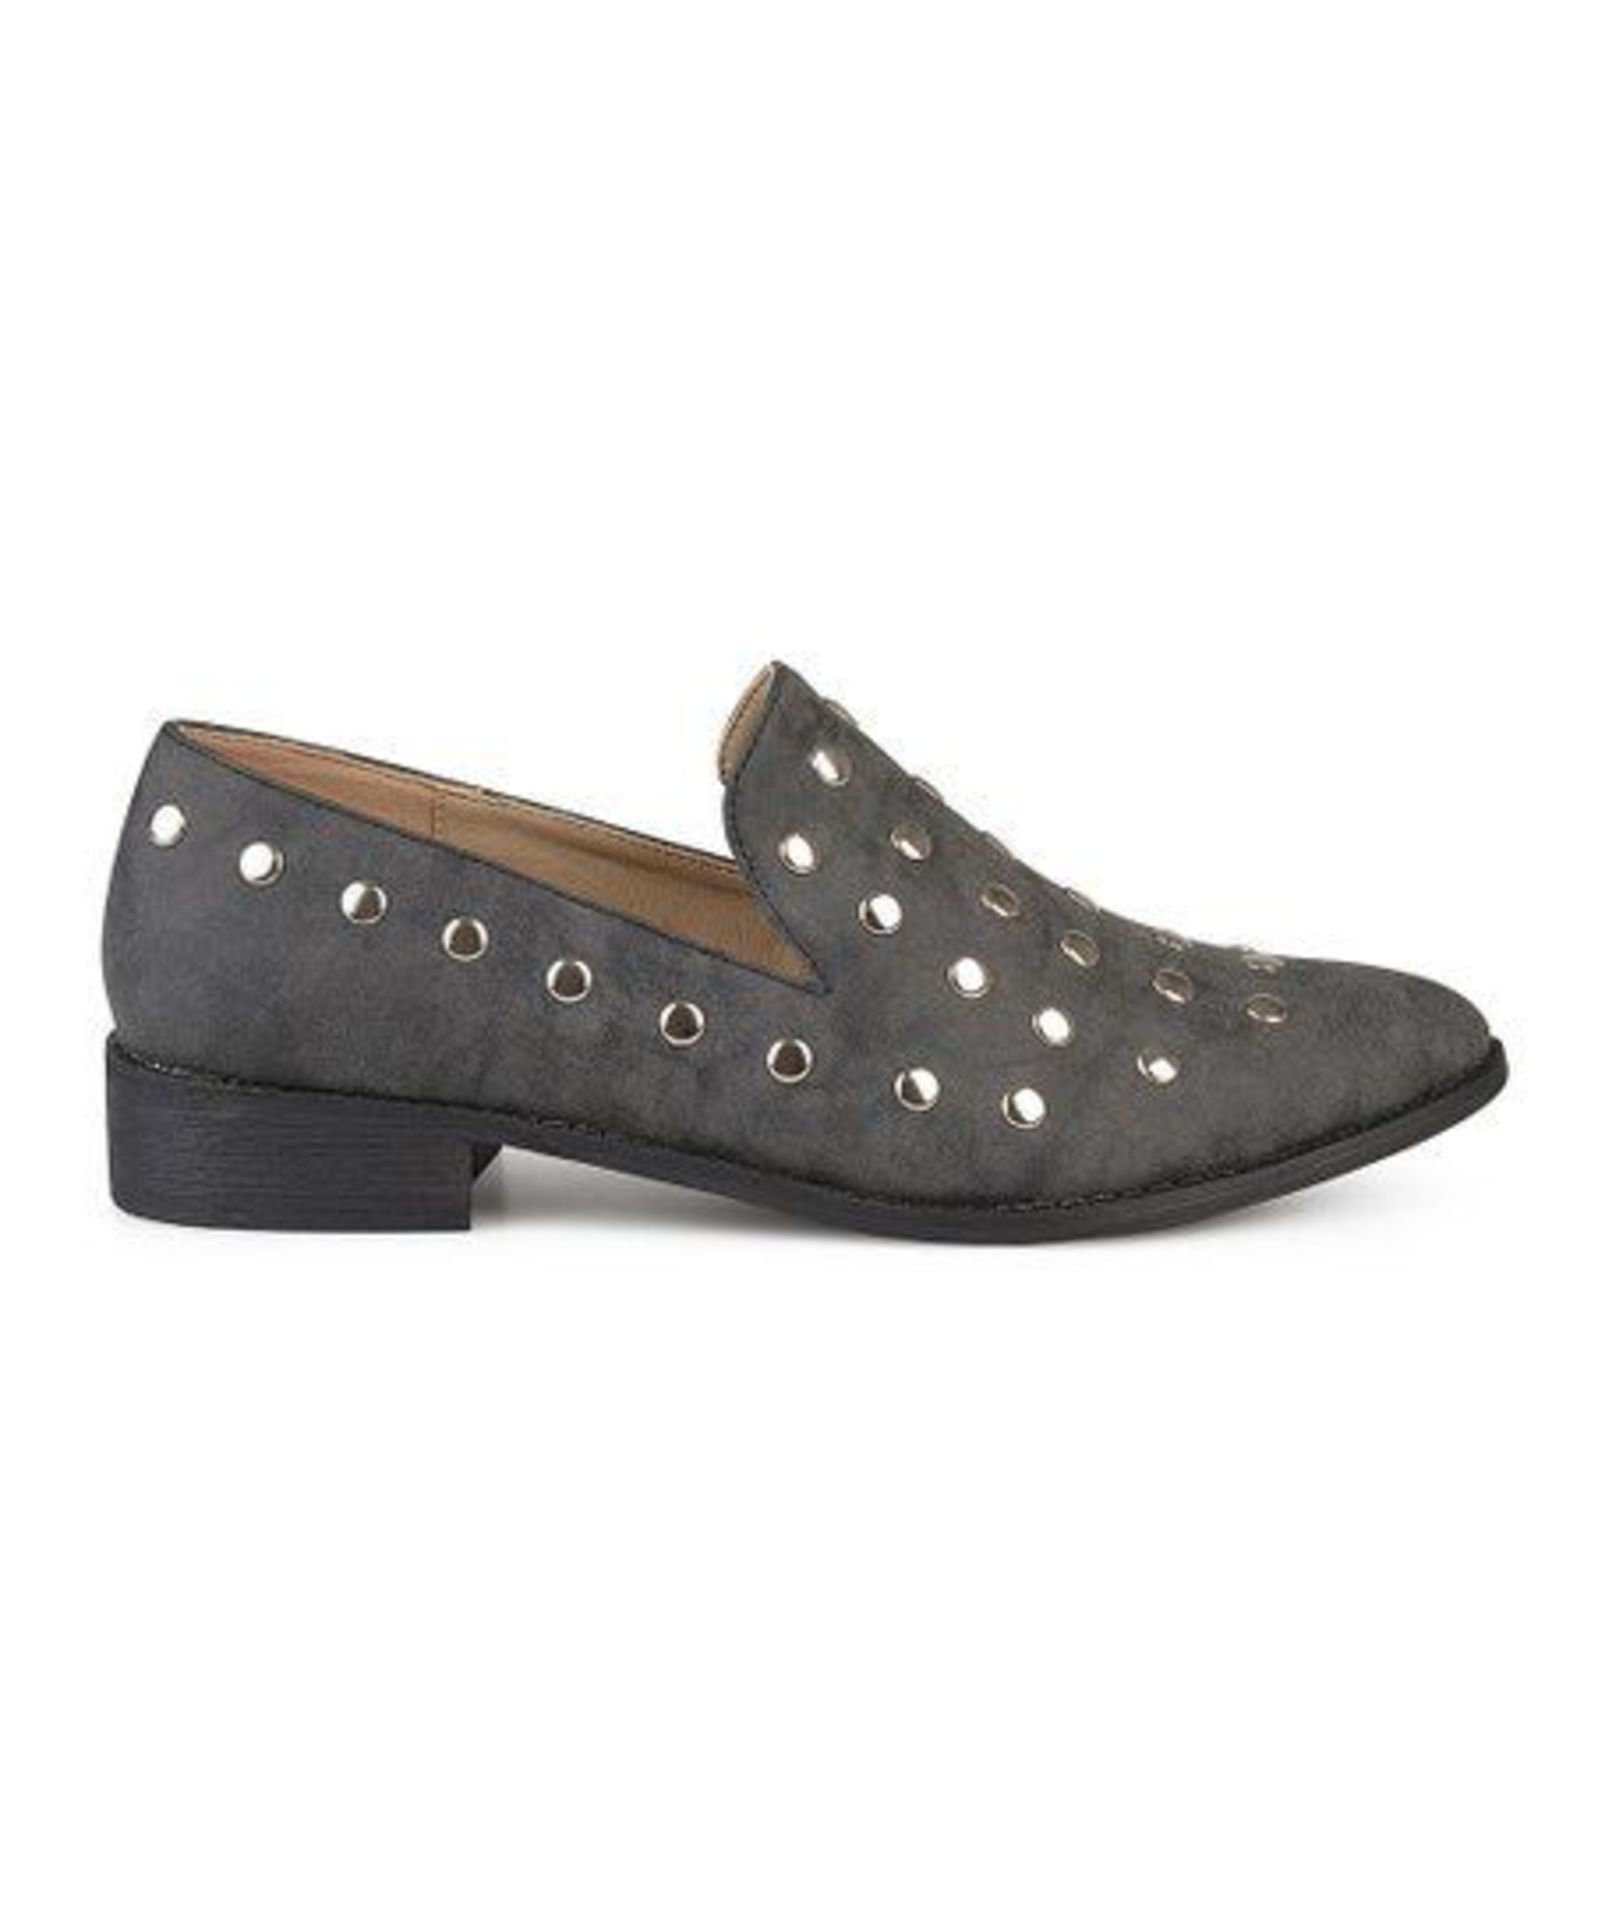 Journee Collection, Black Breeze Loafer, Size Uk 5.5 Us 8 (New With Box) [Ref: 52533950 F]-Tf - Image 3 of 5